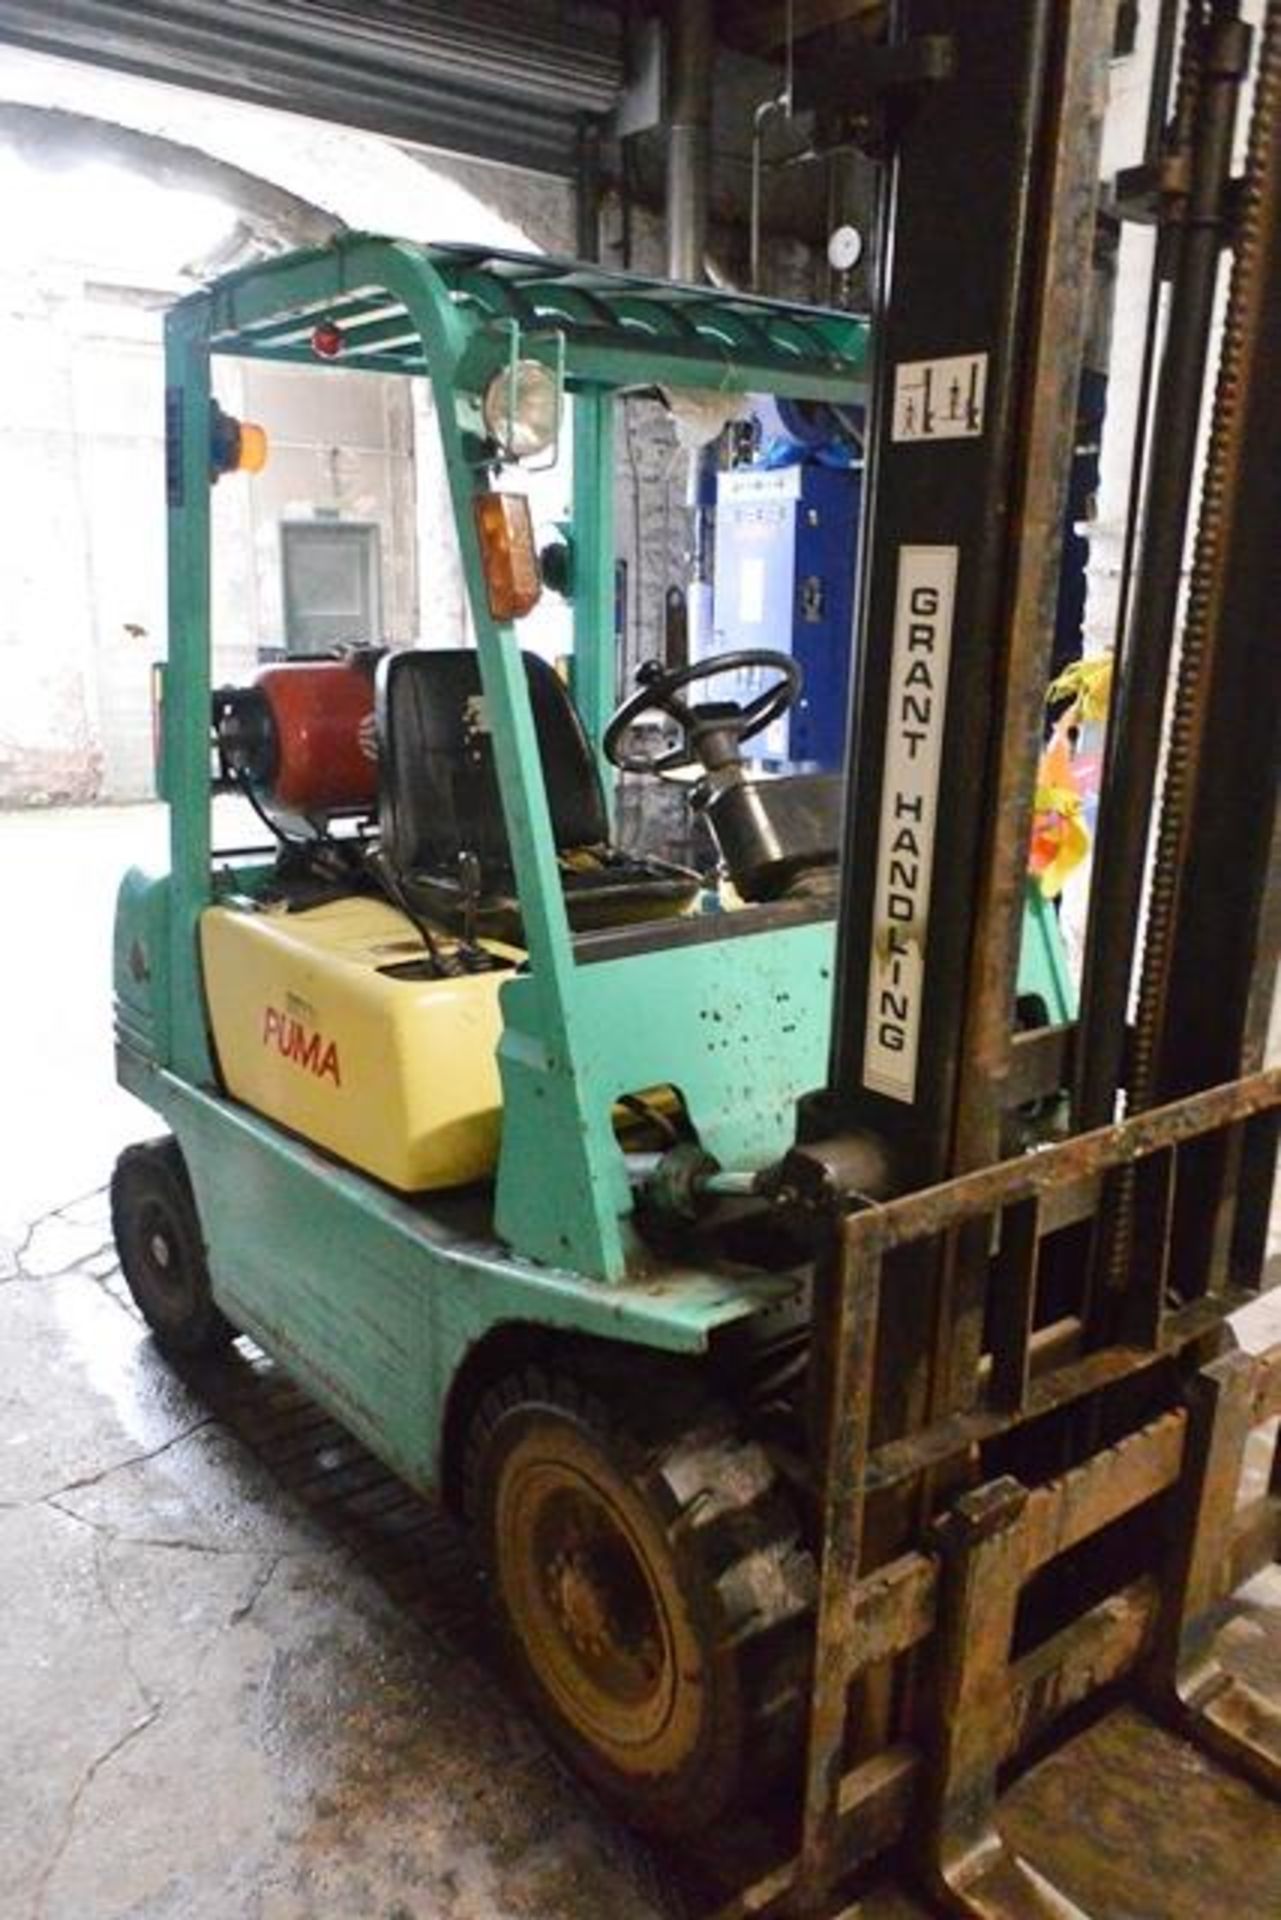 Yang Puma, LPG powered, duplex mast forklift, capacity, hours, serial no. and lift height unknown. - Image 5 of 6